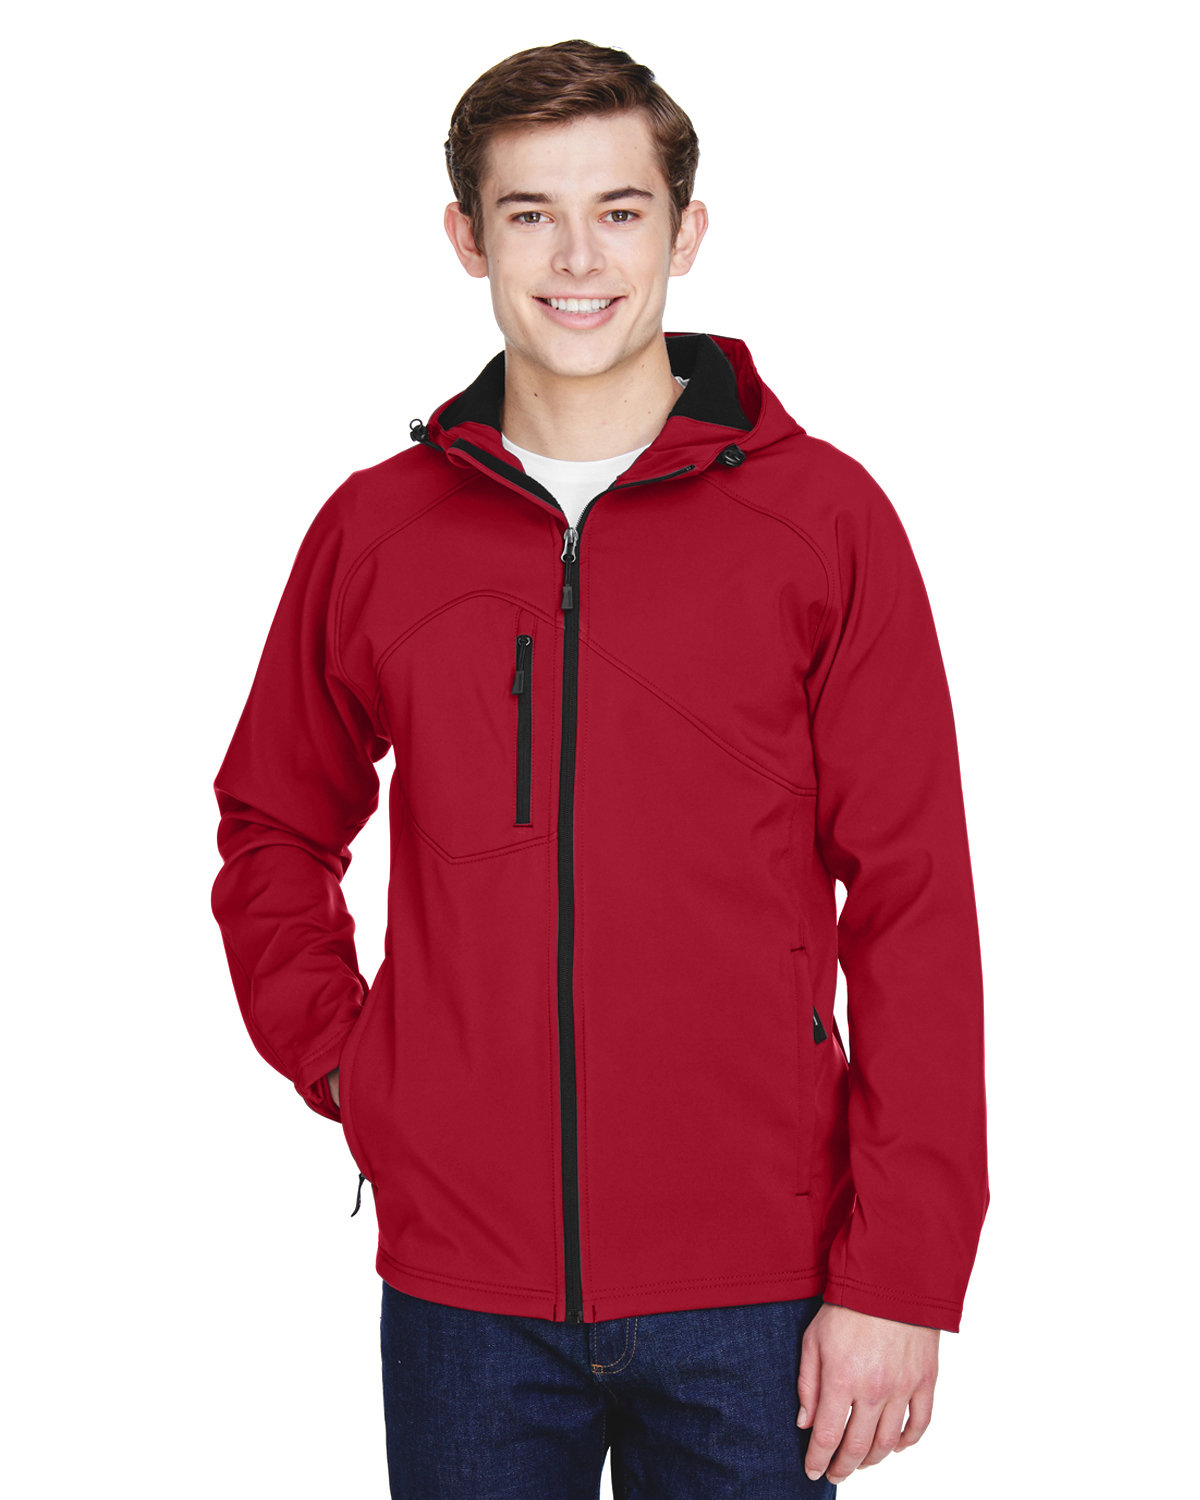 North End Men's Prospect Two-Layer Fleece Bonded Soft Shell Hooded Jacket MOLTEN RED 